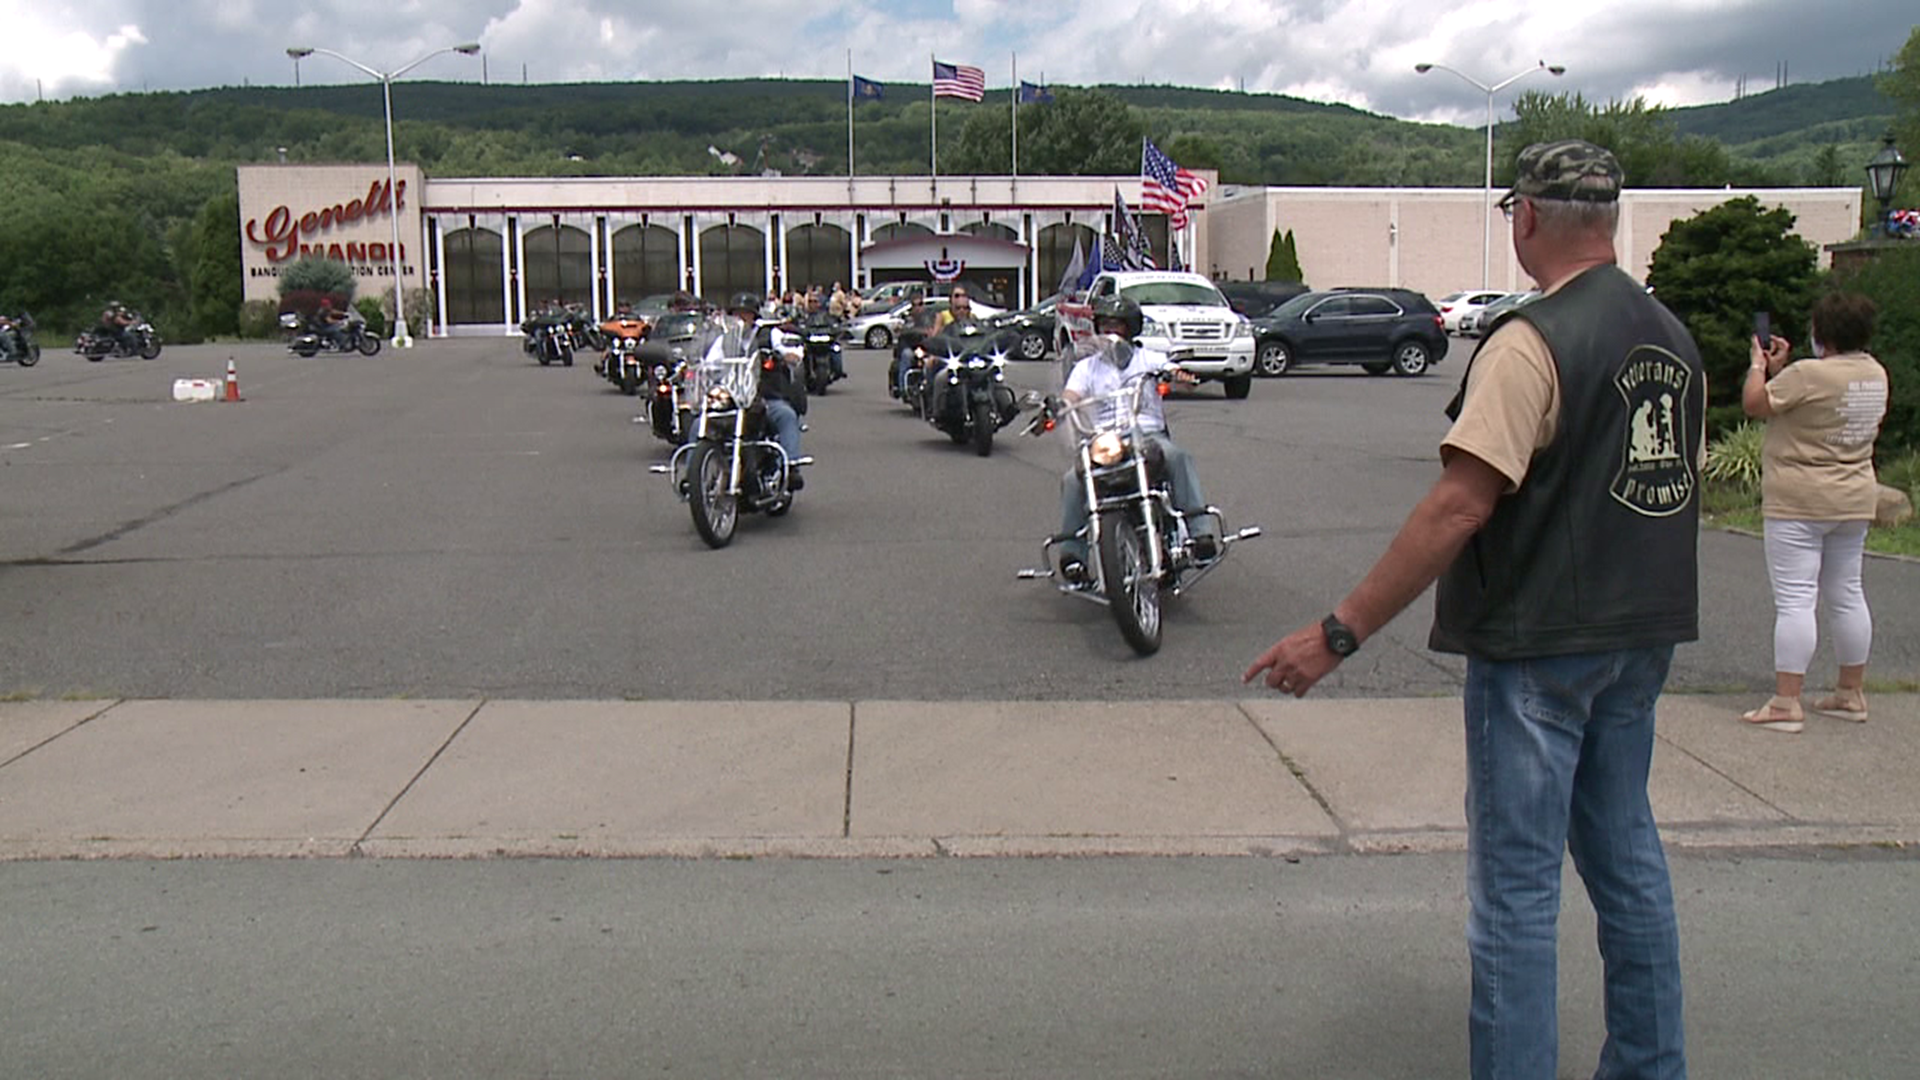 More than 100 people took part in the motorcycle ride to Merli-Sarnoski Park in honor of the vets we've lost.